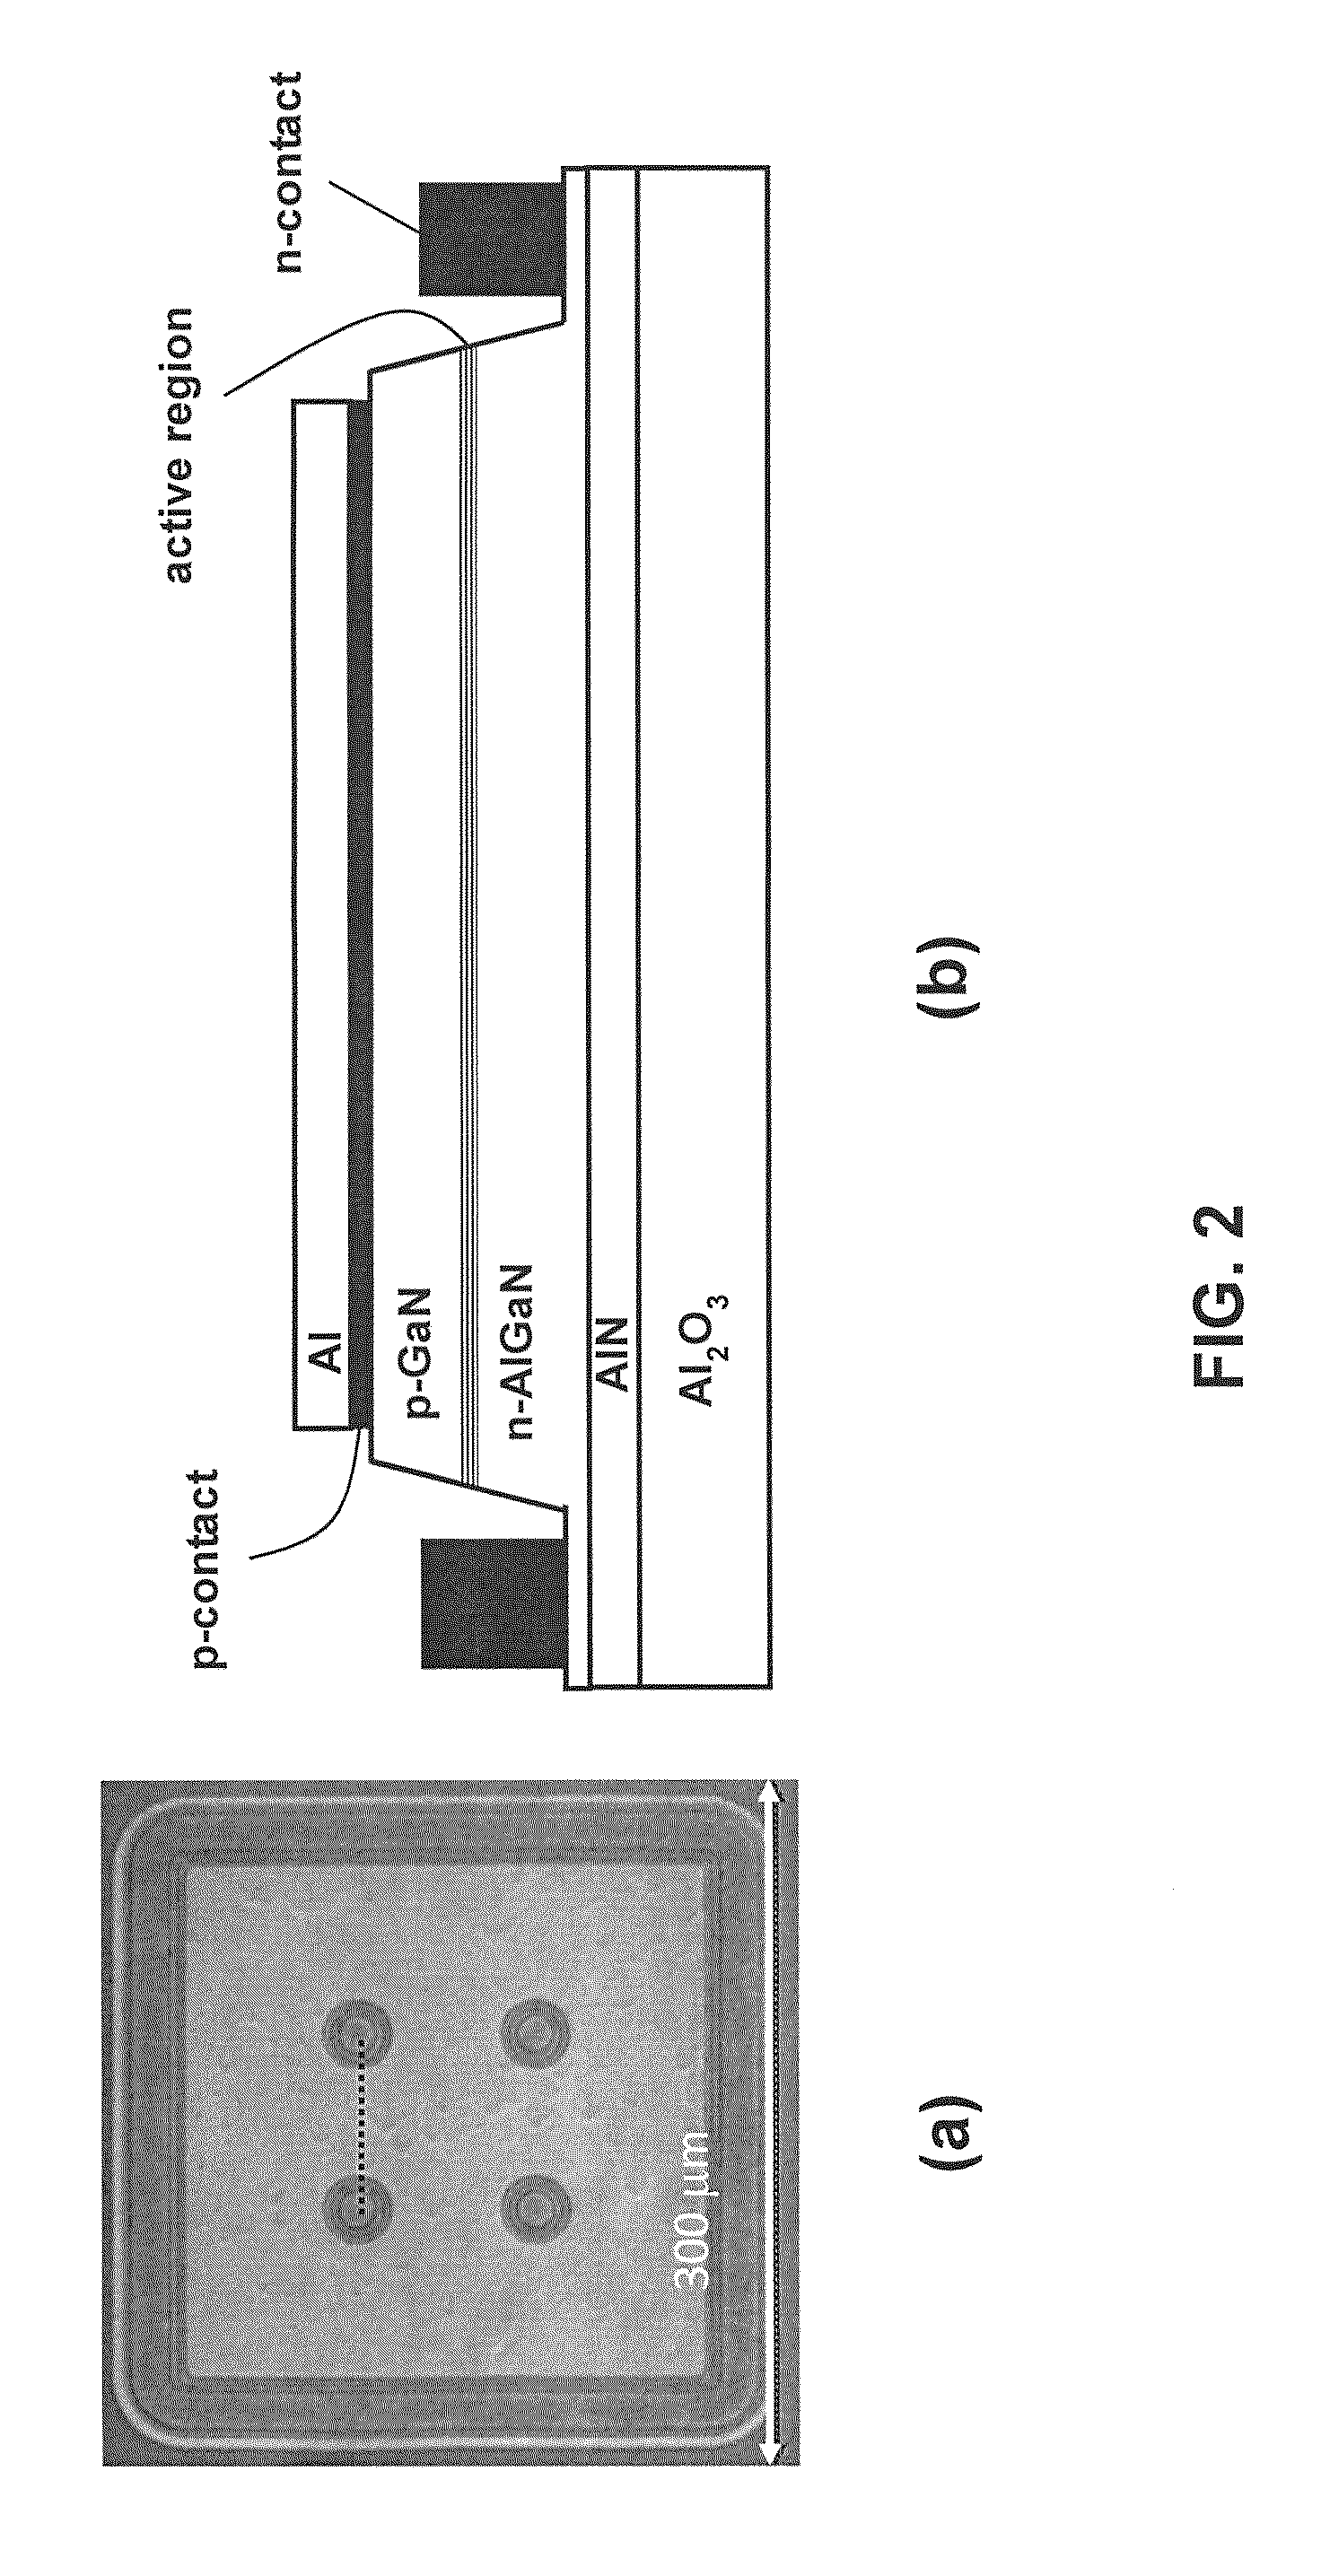 High extraction efficiency ultraviolet light-emitting diode